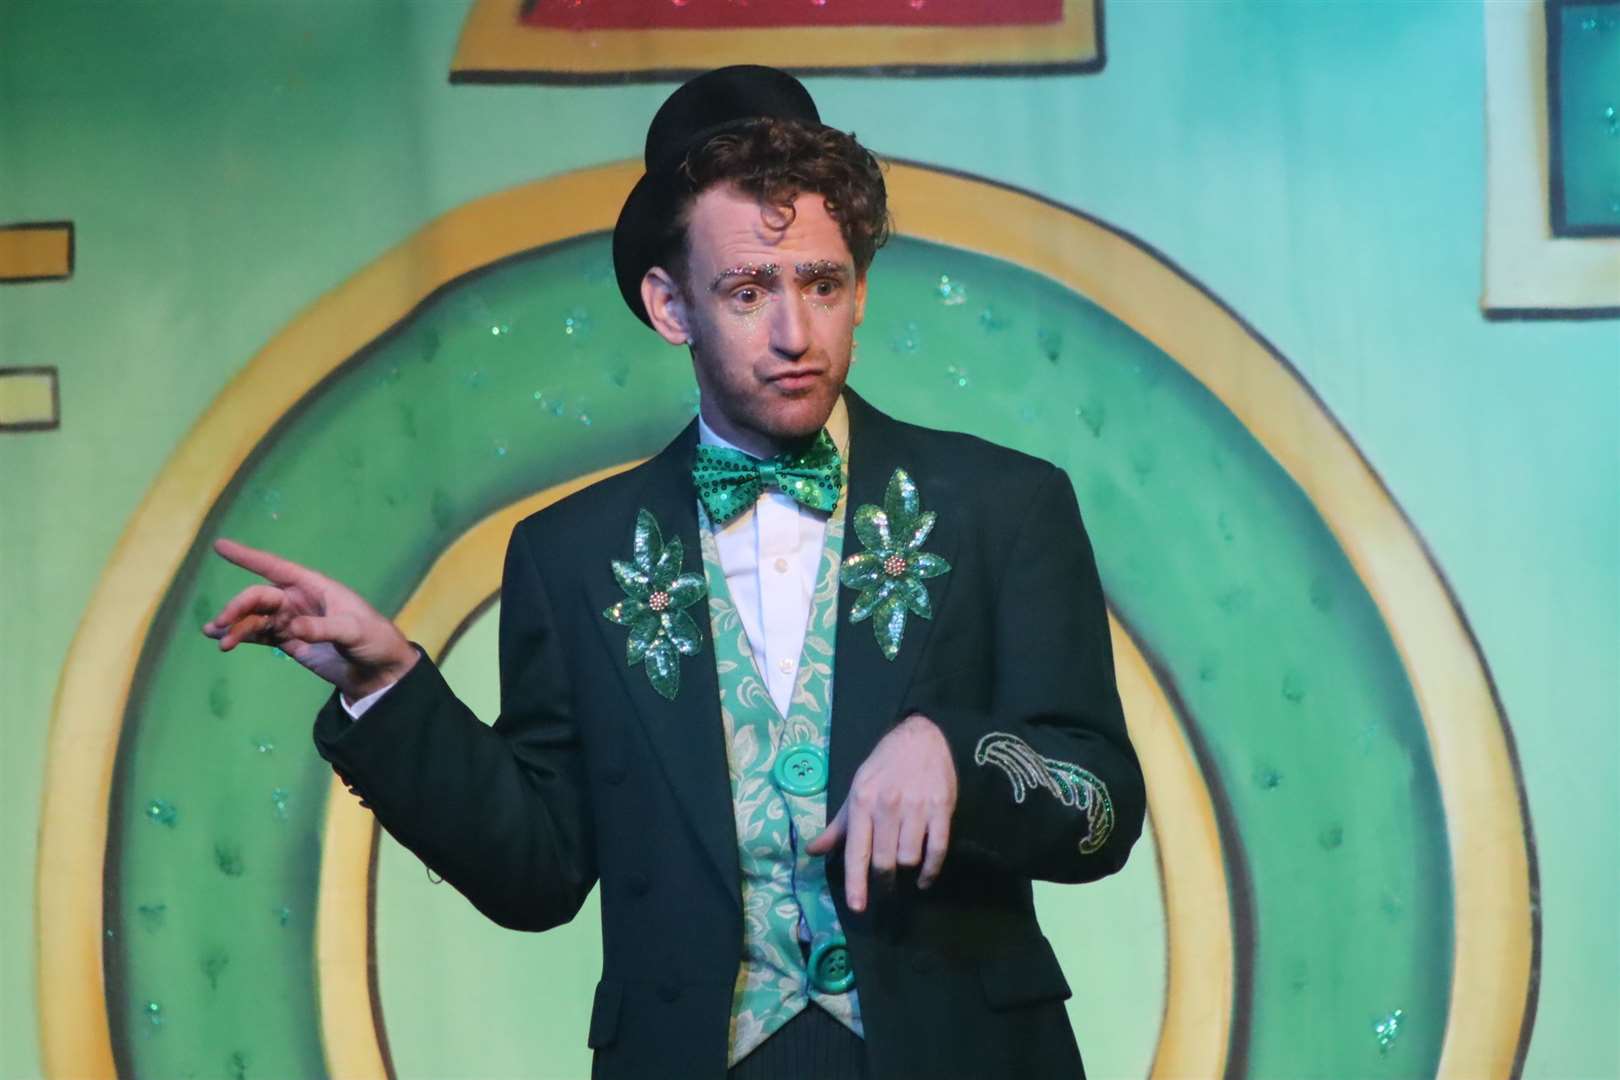 Chris Rankin in the title role of the Wizard of Oz at Swallows Leisure Centre, Sittingbourne (24320942)